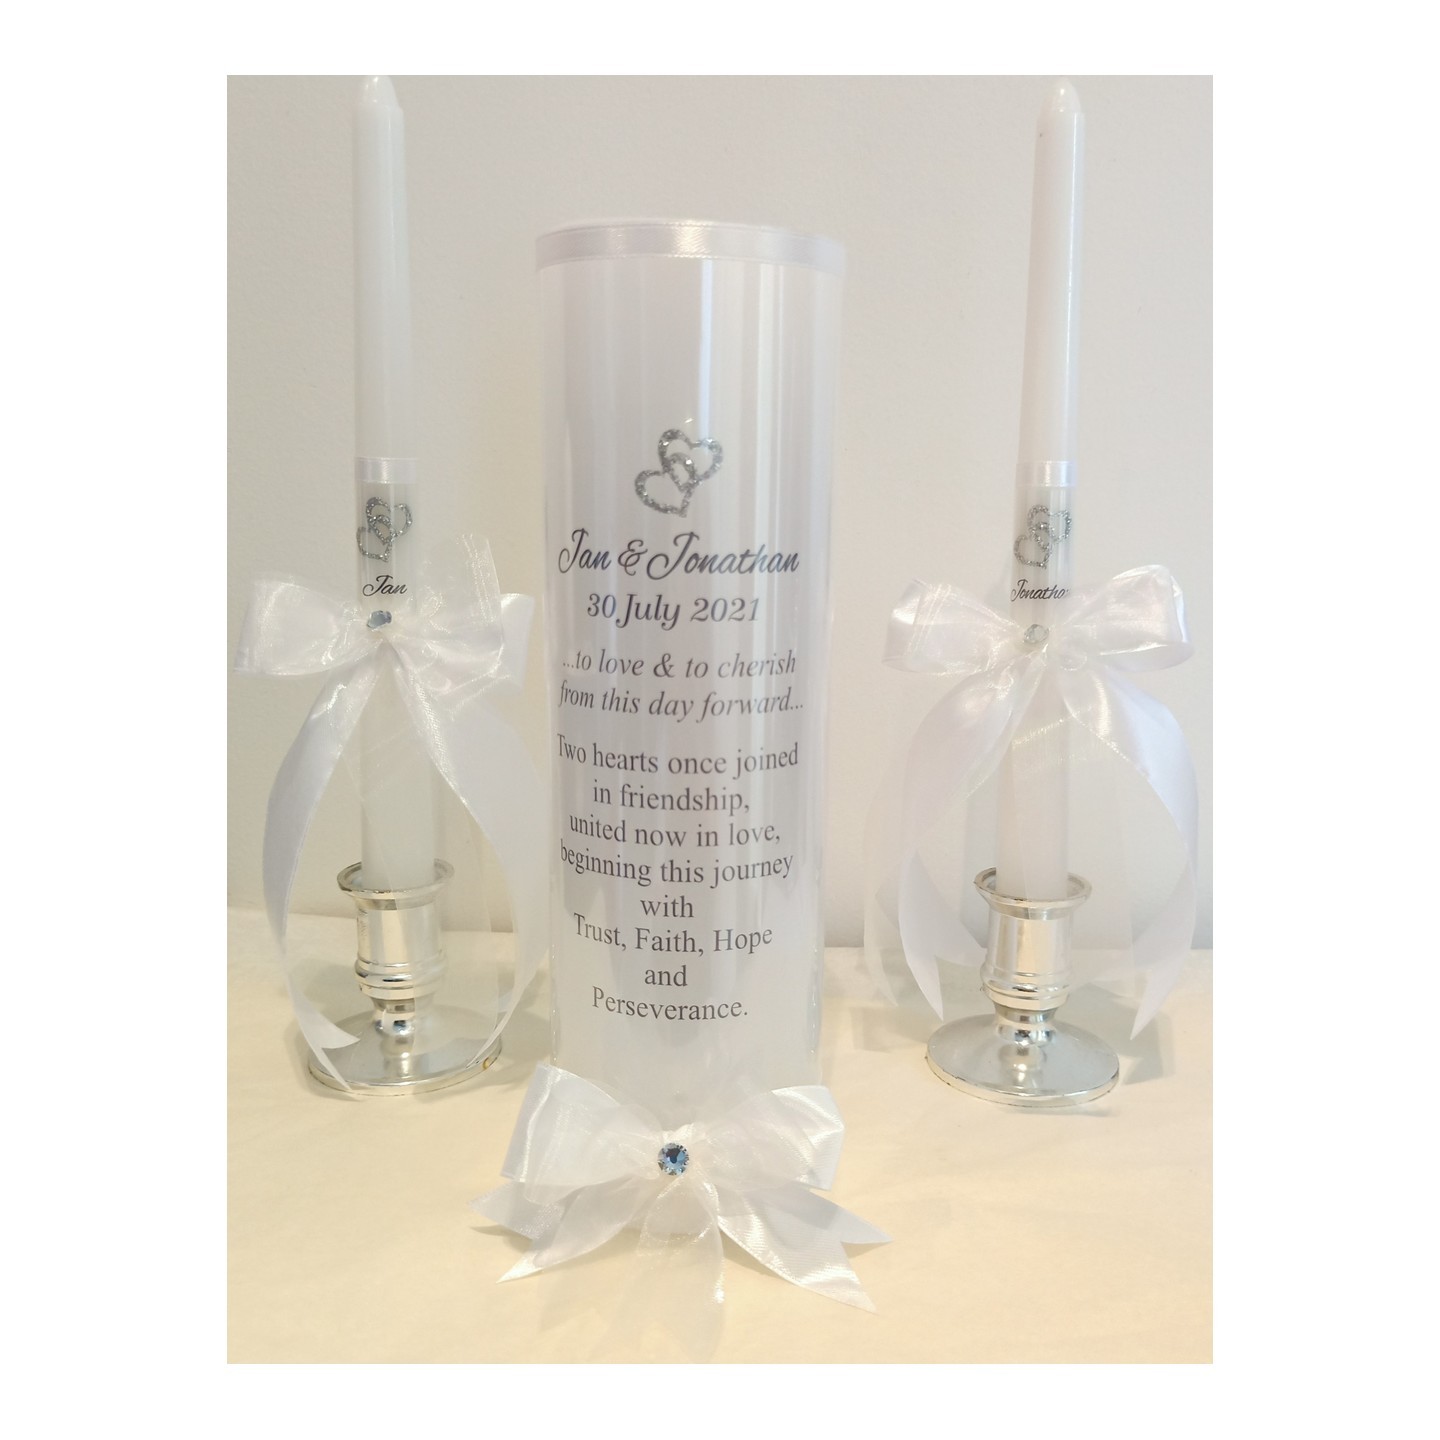 PERSONALIZED UNITY CANDLES - INTERLOCKING HEARTS - Be completely humble and gentle.." (Free Shipping)